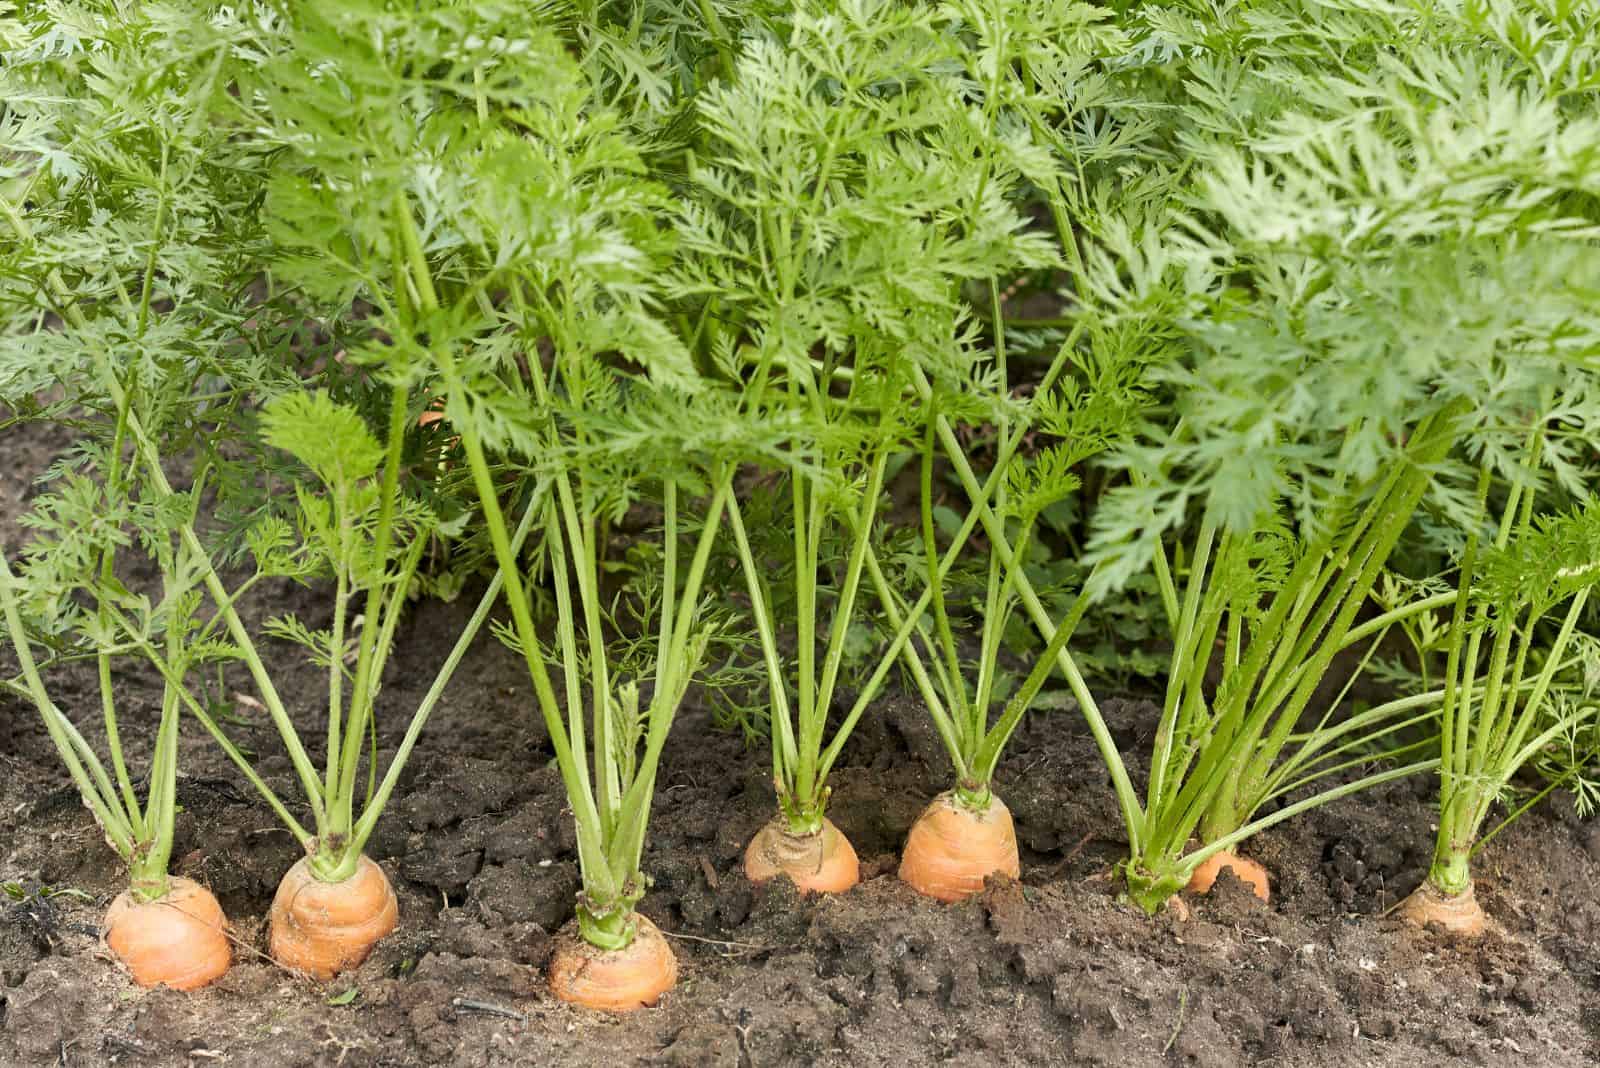 Carrot Companion Plants: To Grow Or Not To Grow?